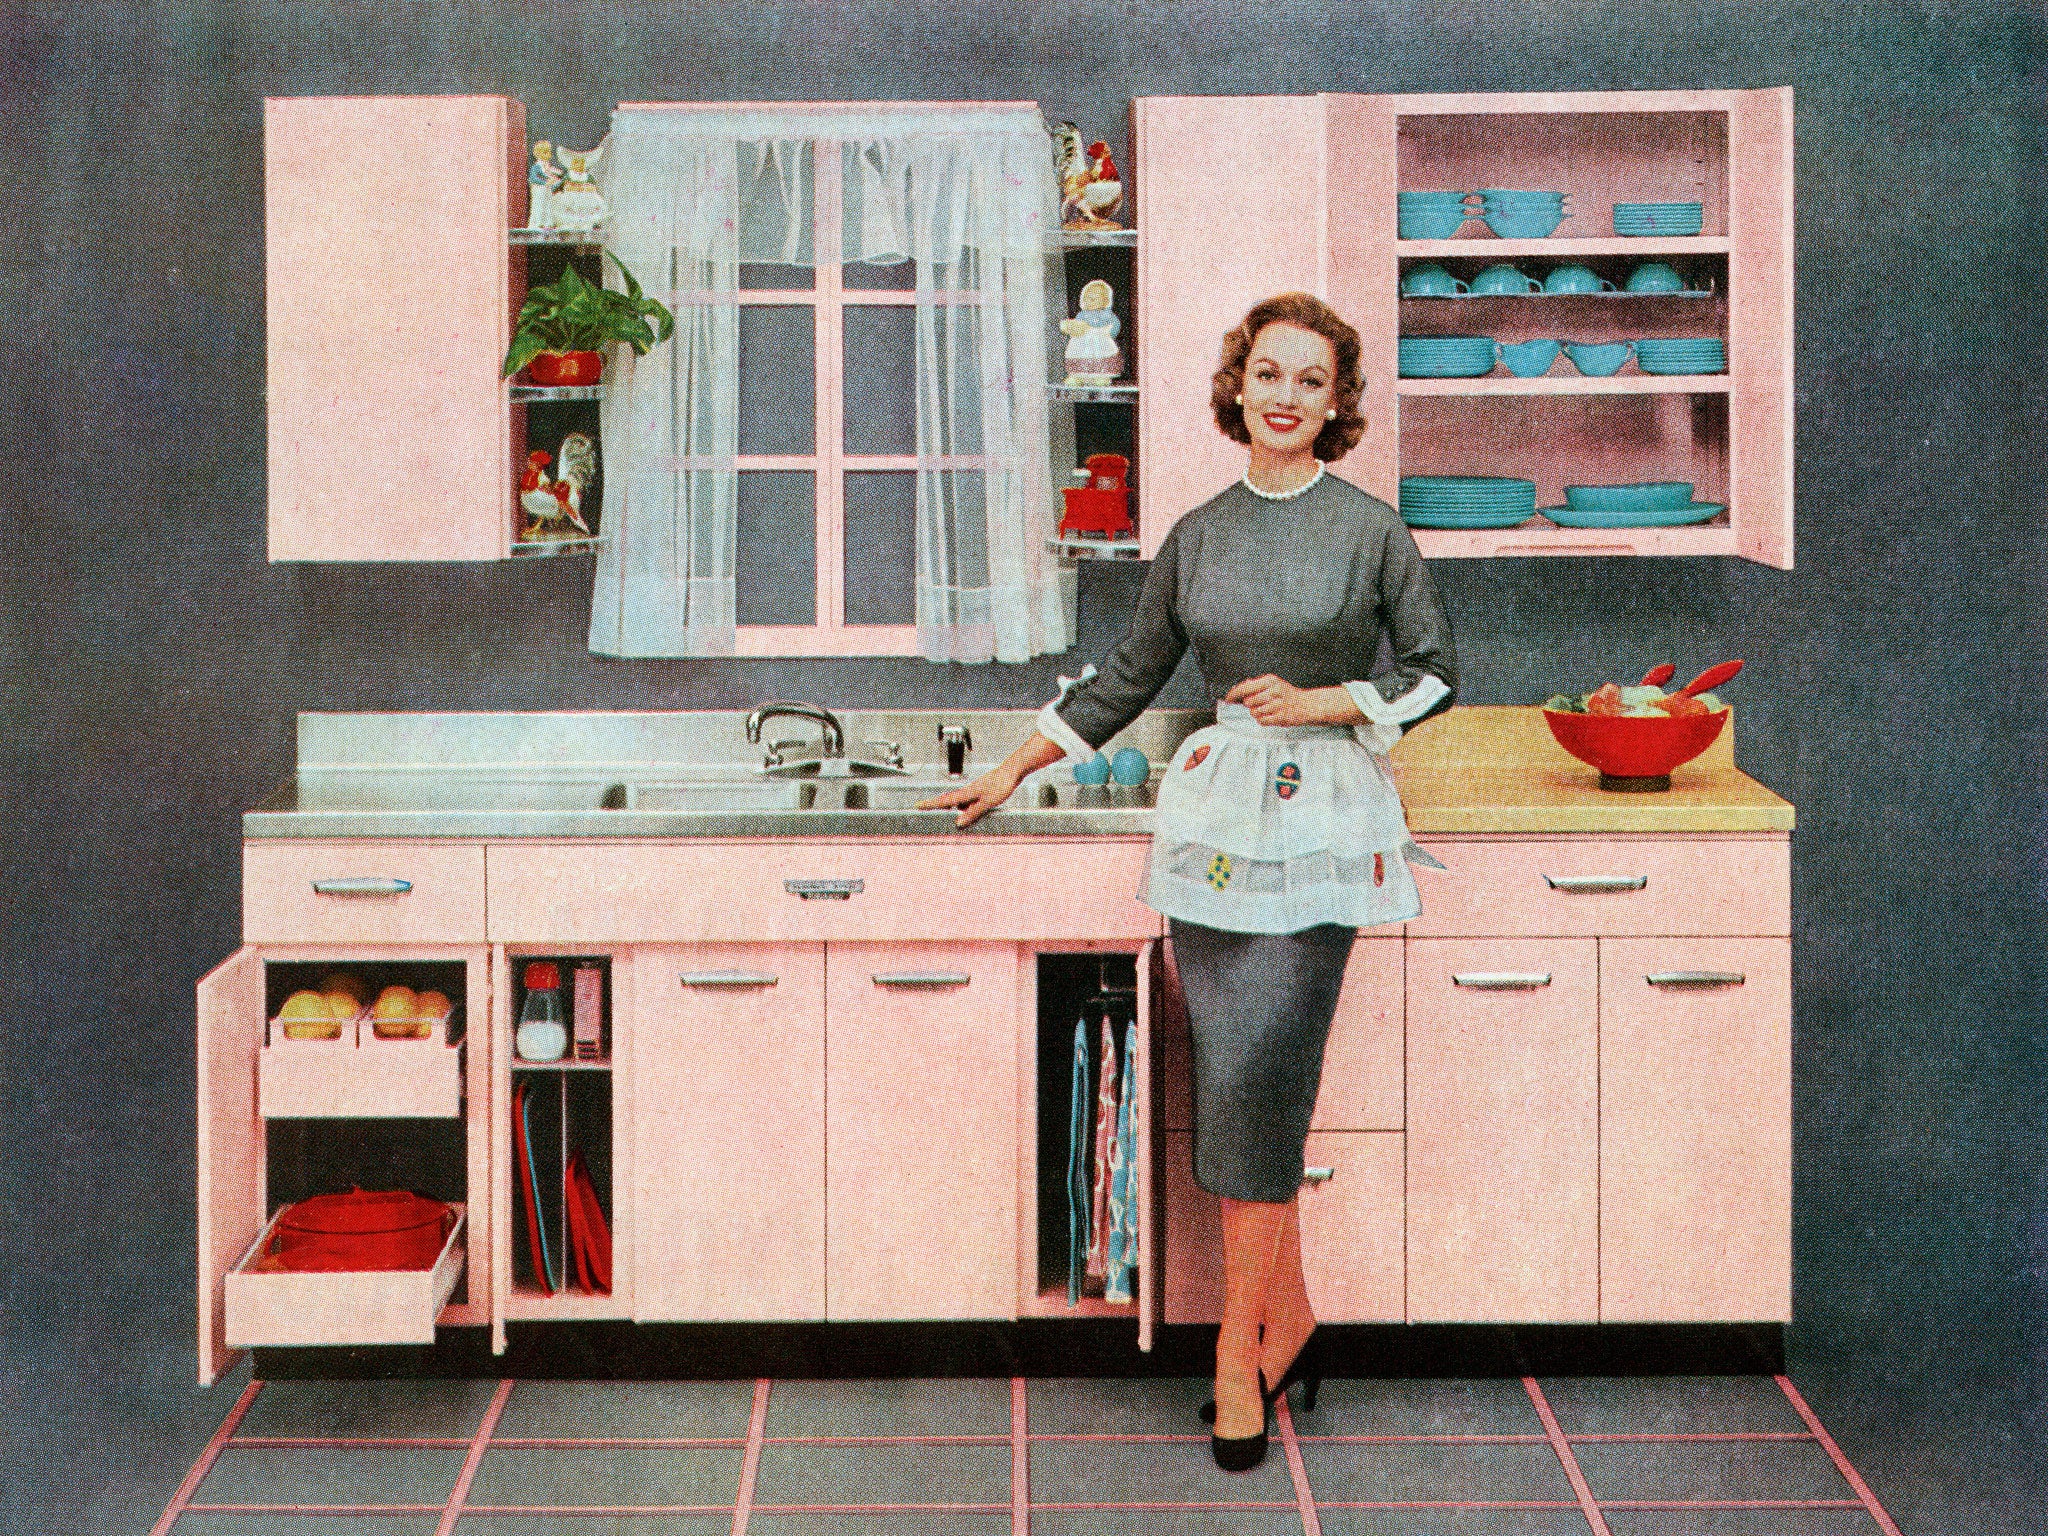 Fashion plate: Vintage illustration of a housewife standing in her new pink kitchen, 1957